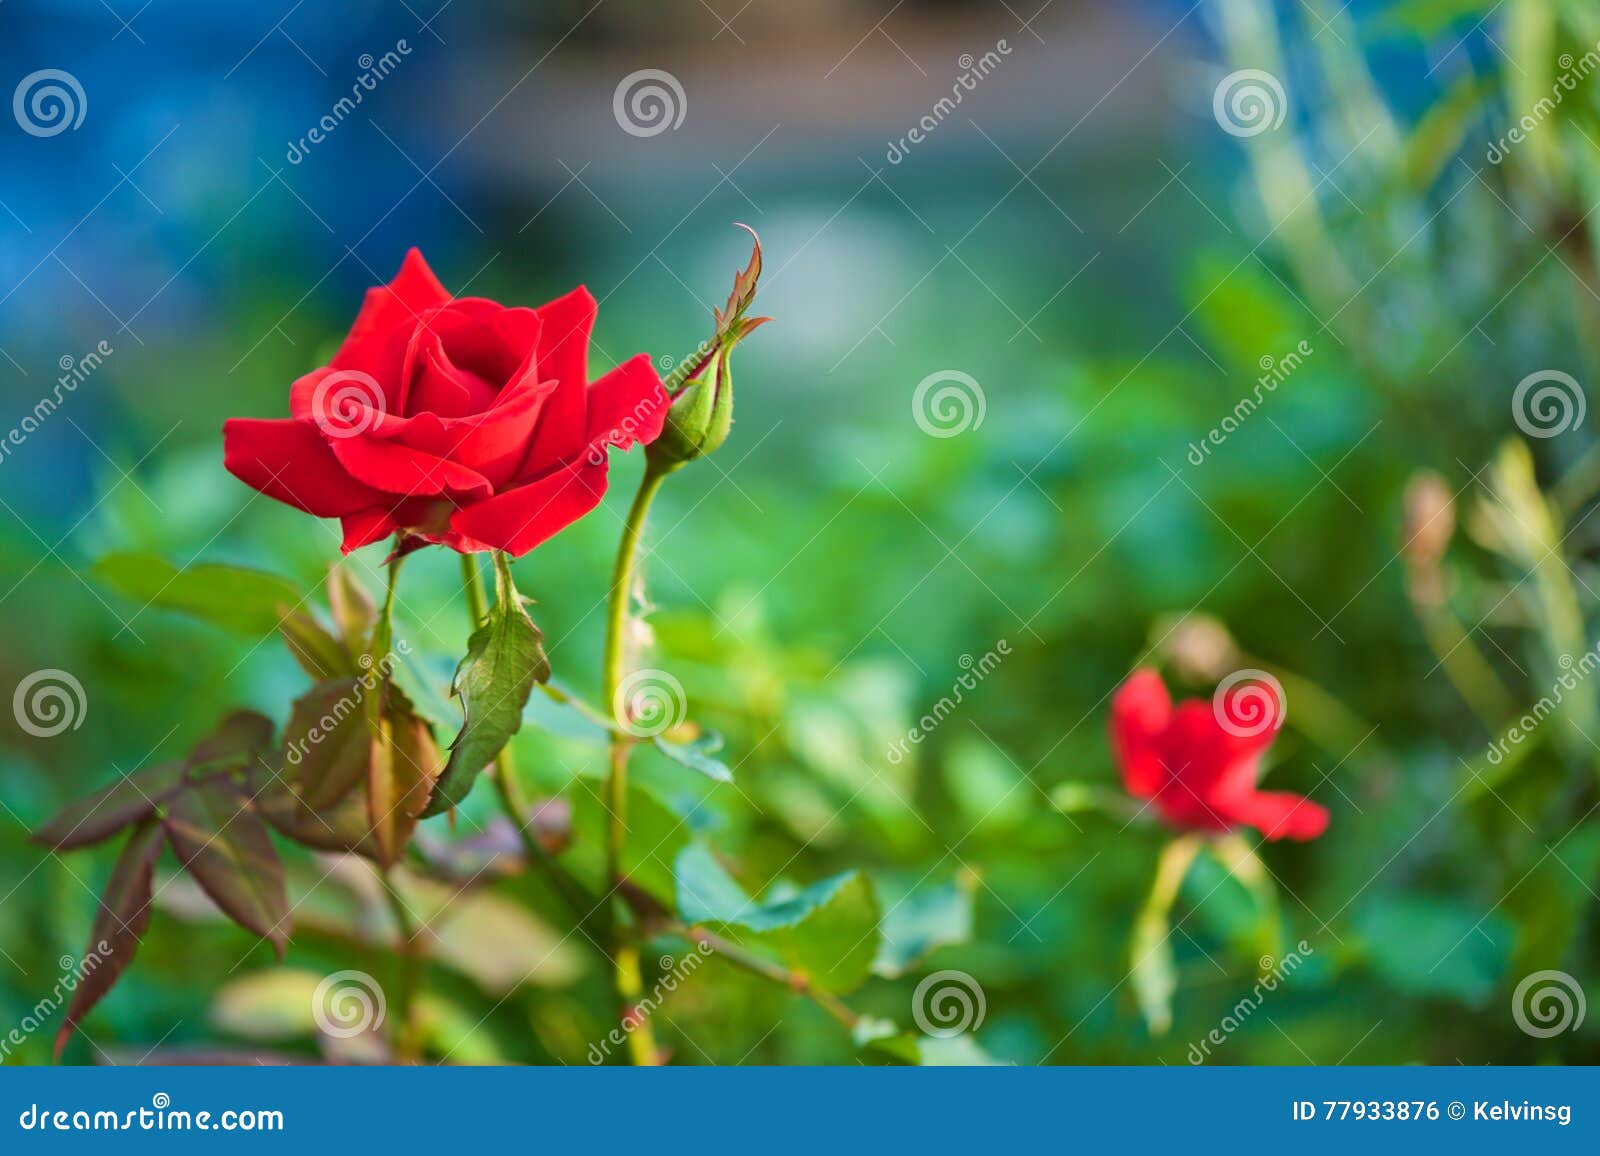 Red Rose with Blurred Background Setting Stock Photo - Image of burning,  setting: 77933876